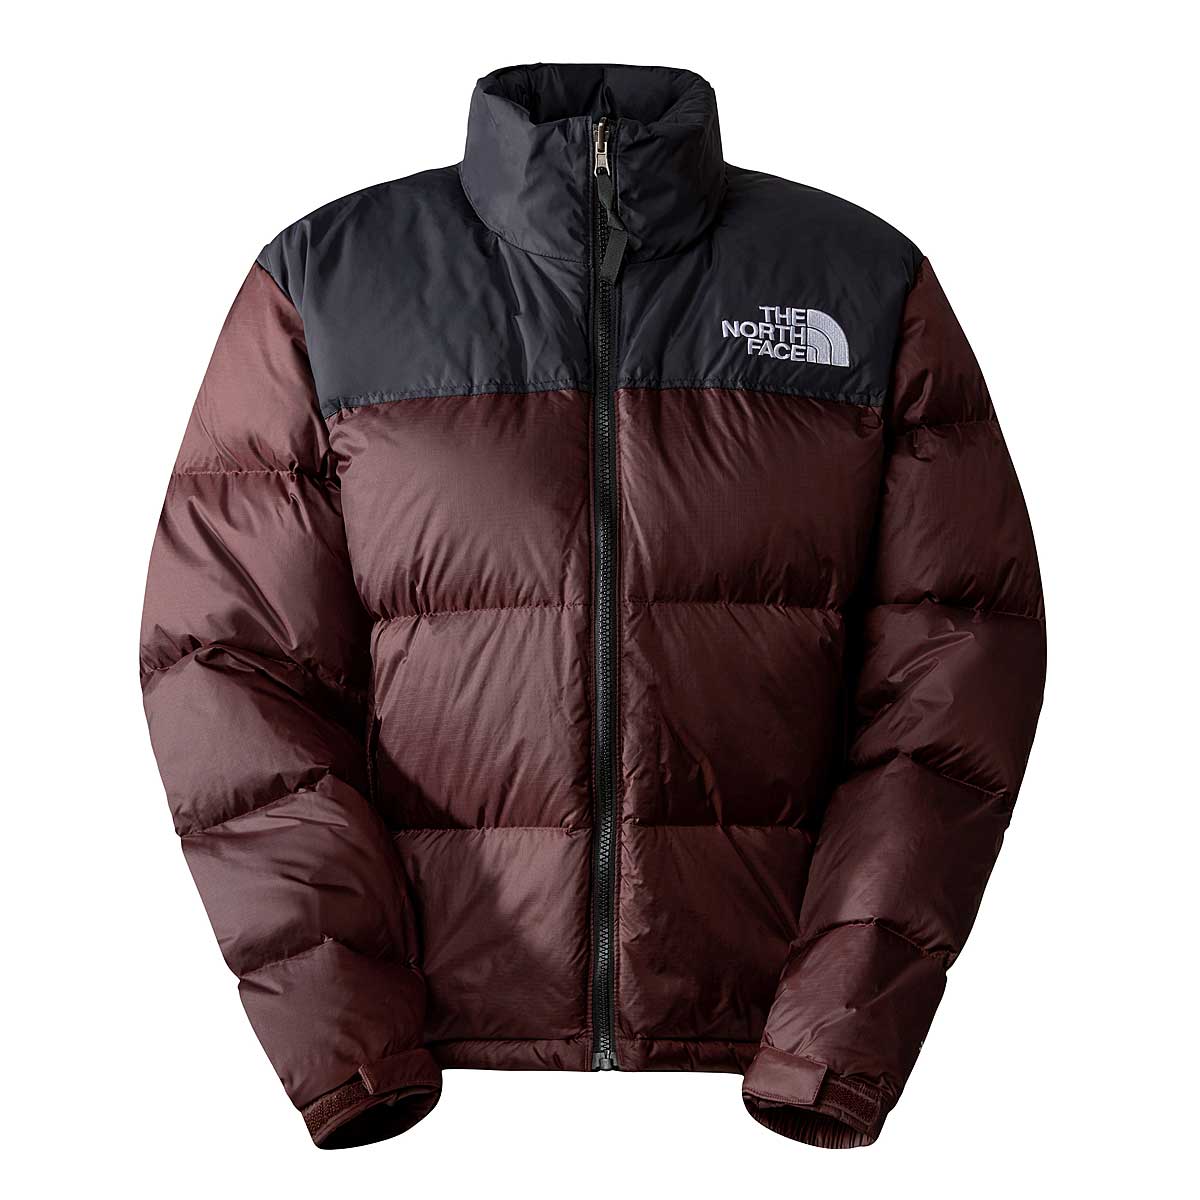 The North Face 1996 Retro Jacket, Brown/black XS